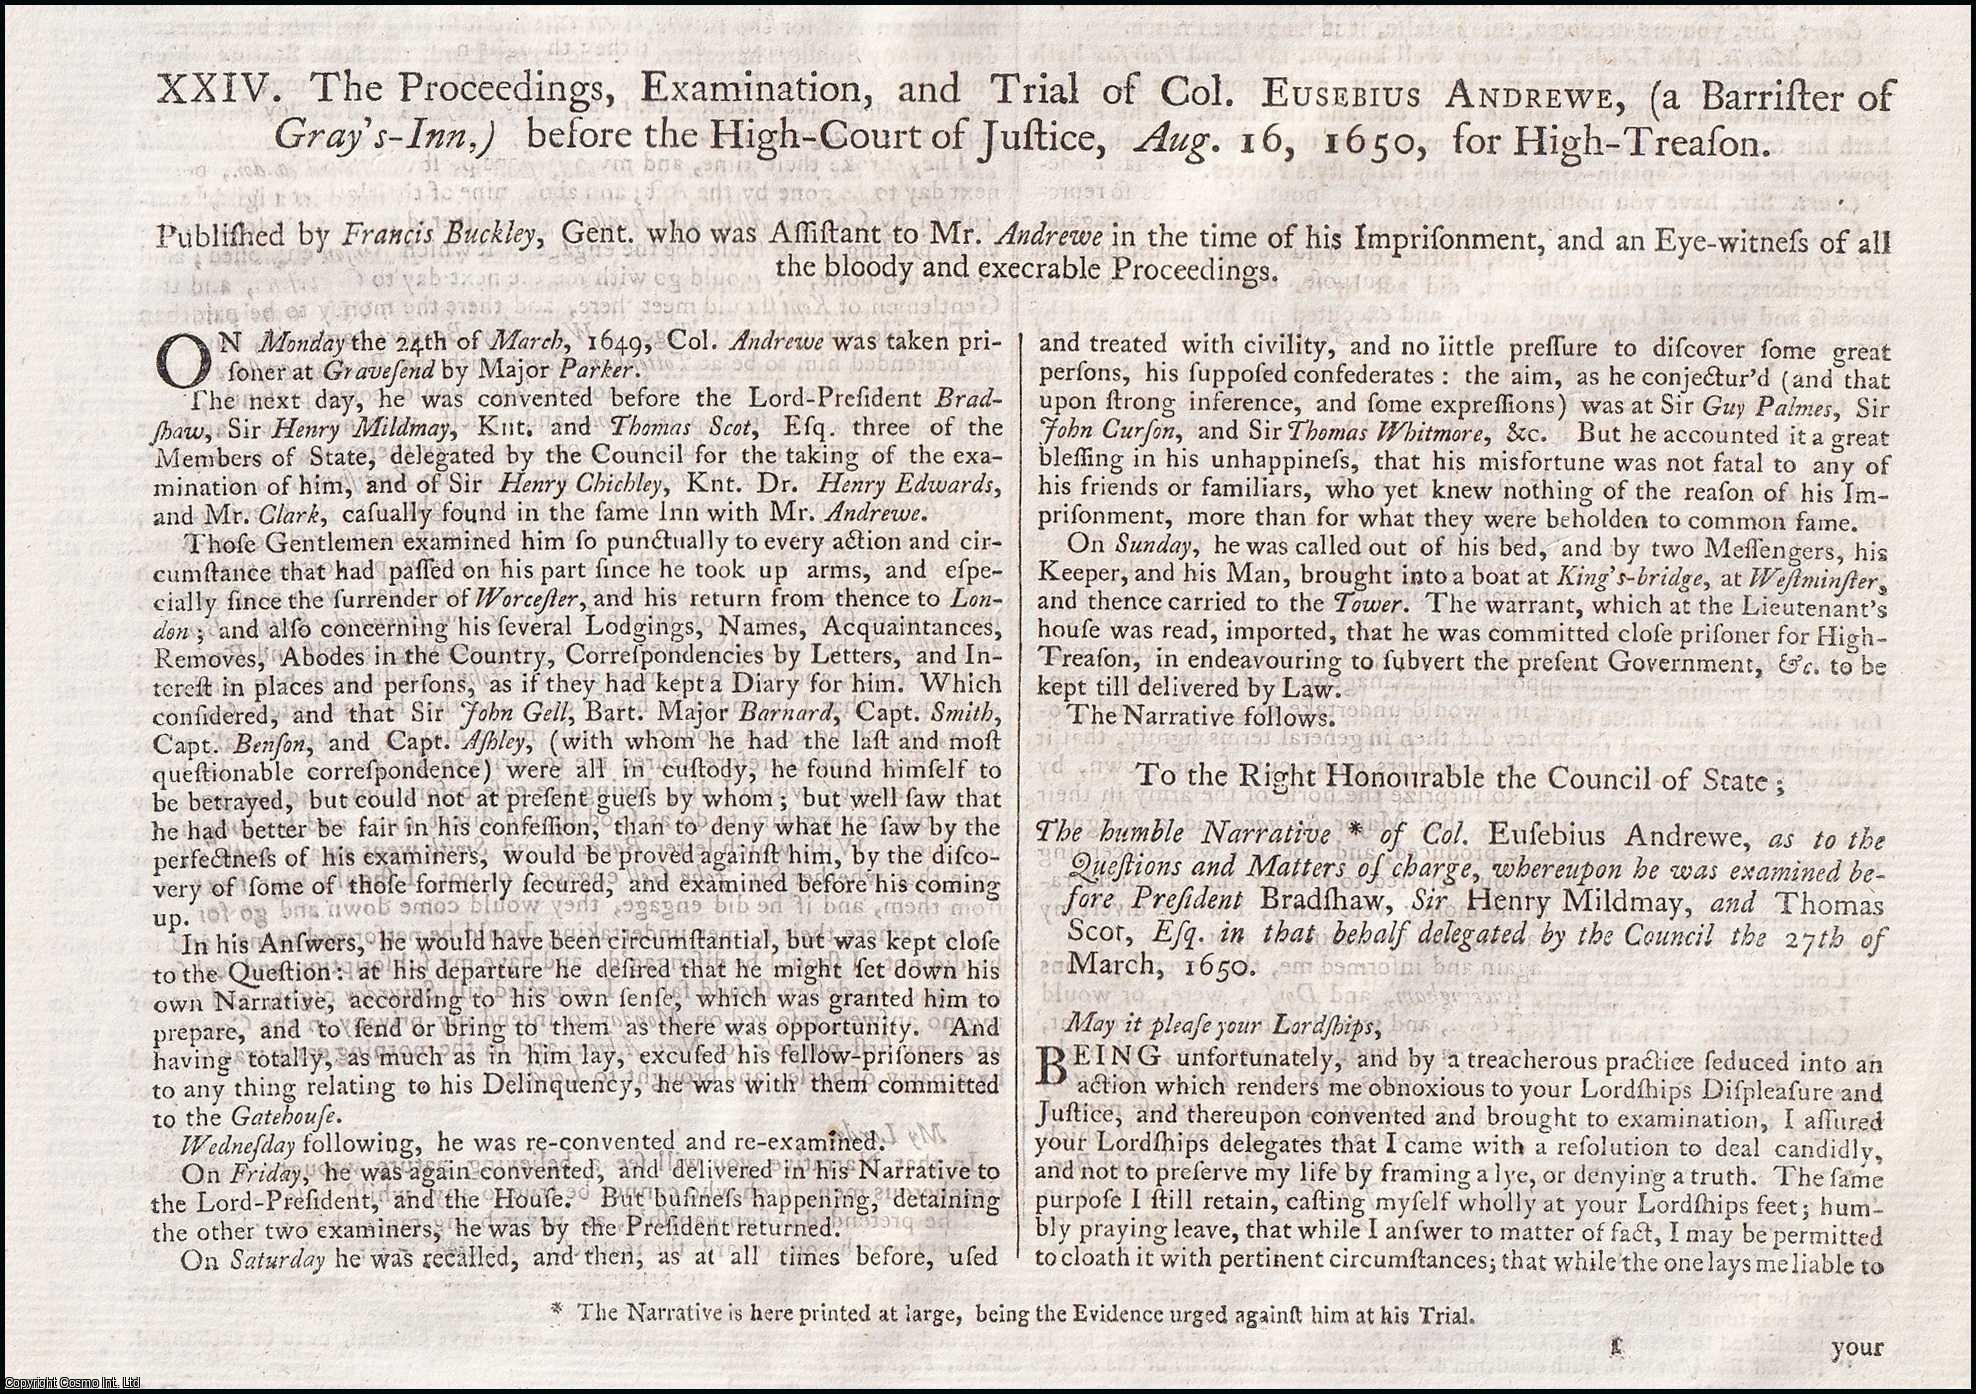 [Trial]. - The Proceedings, Examination, and Trial of Colonel Eusebius Andrewe, (a Barrister of Gray's-Inn,) before the High-Court of Justice, August 16th, 1650, for High-Treason. An original report from the Collected State Trials.